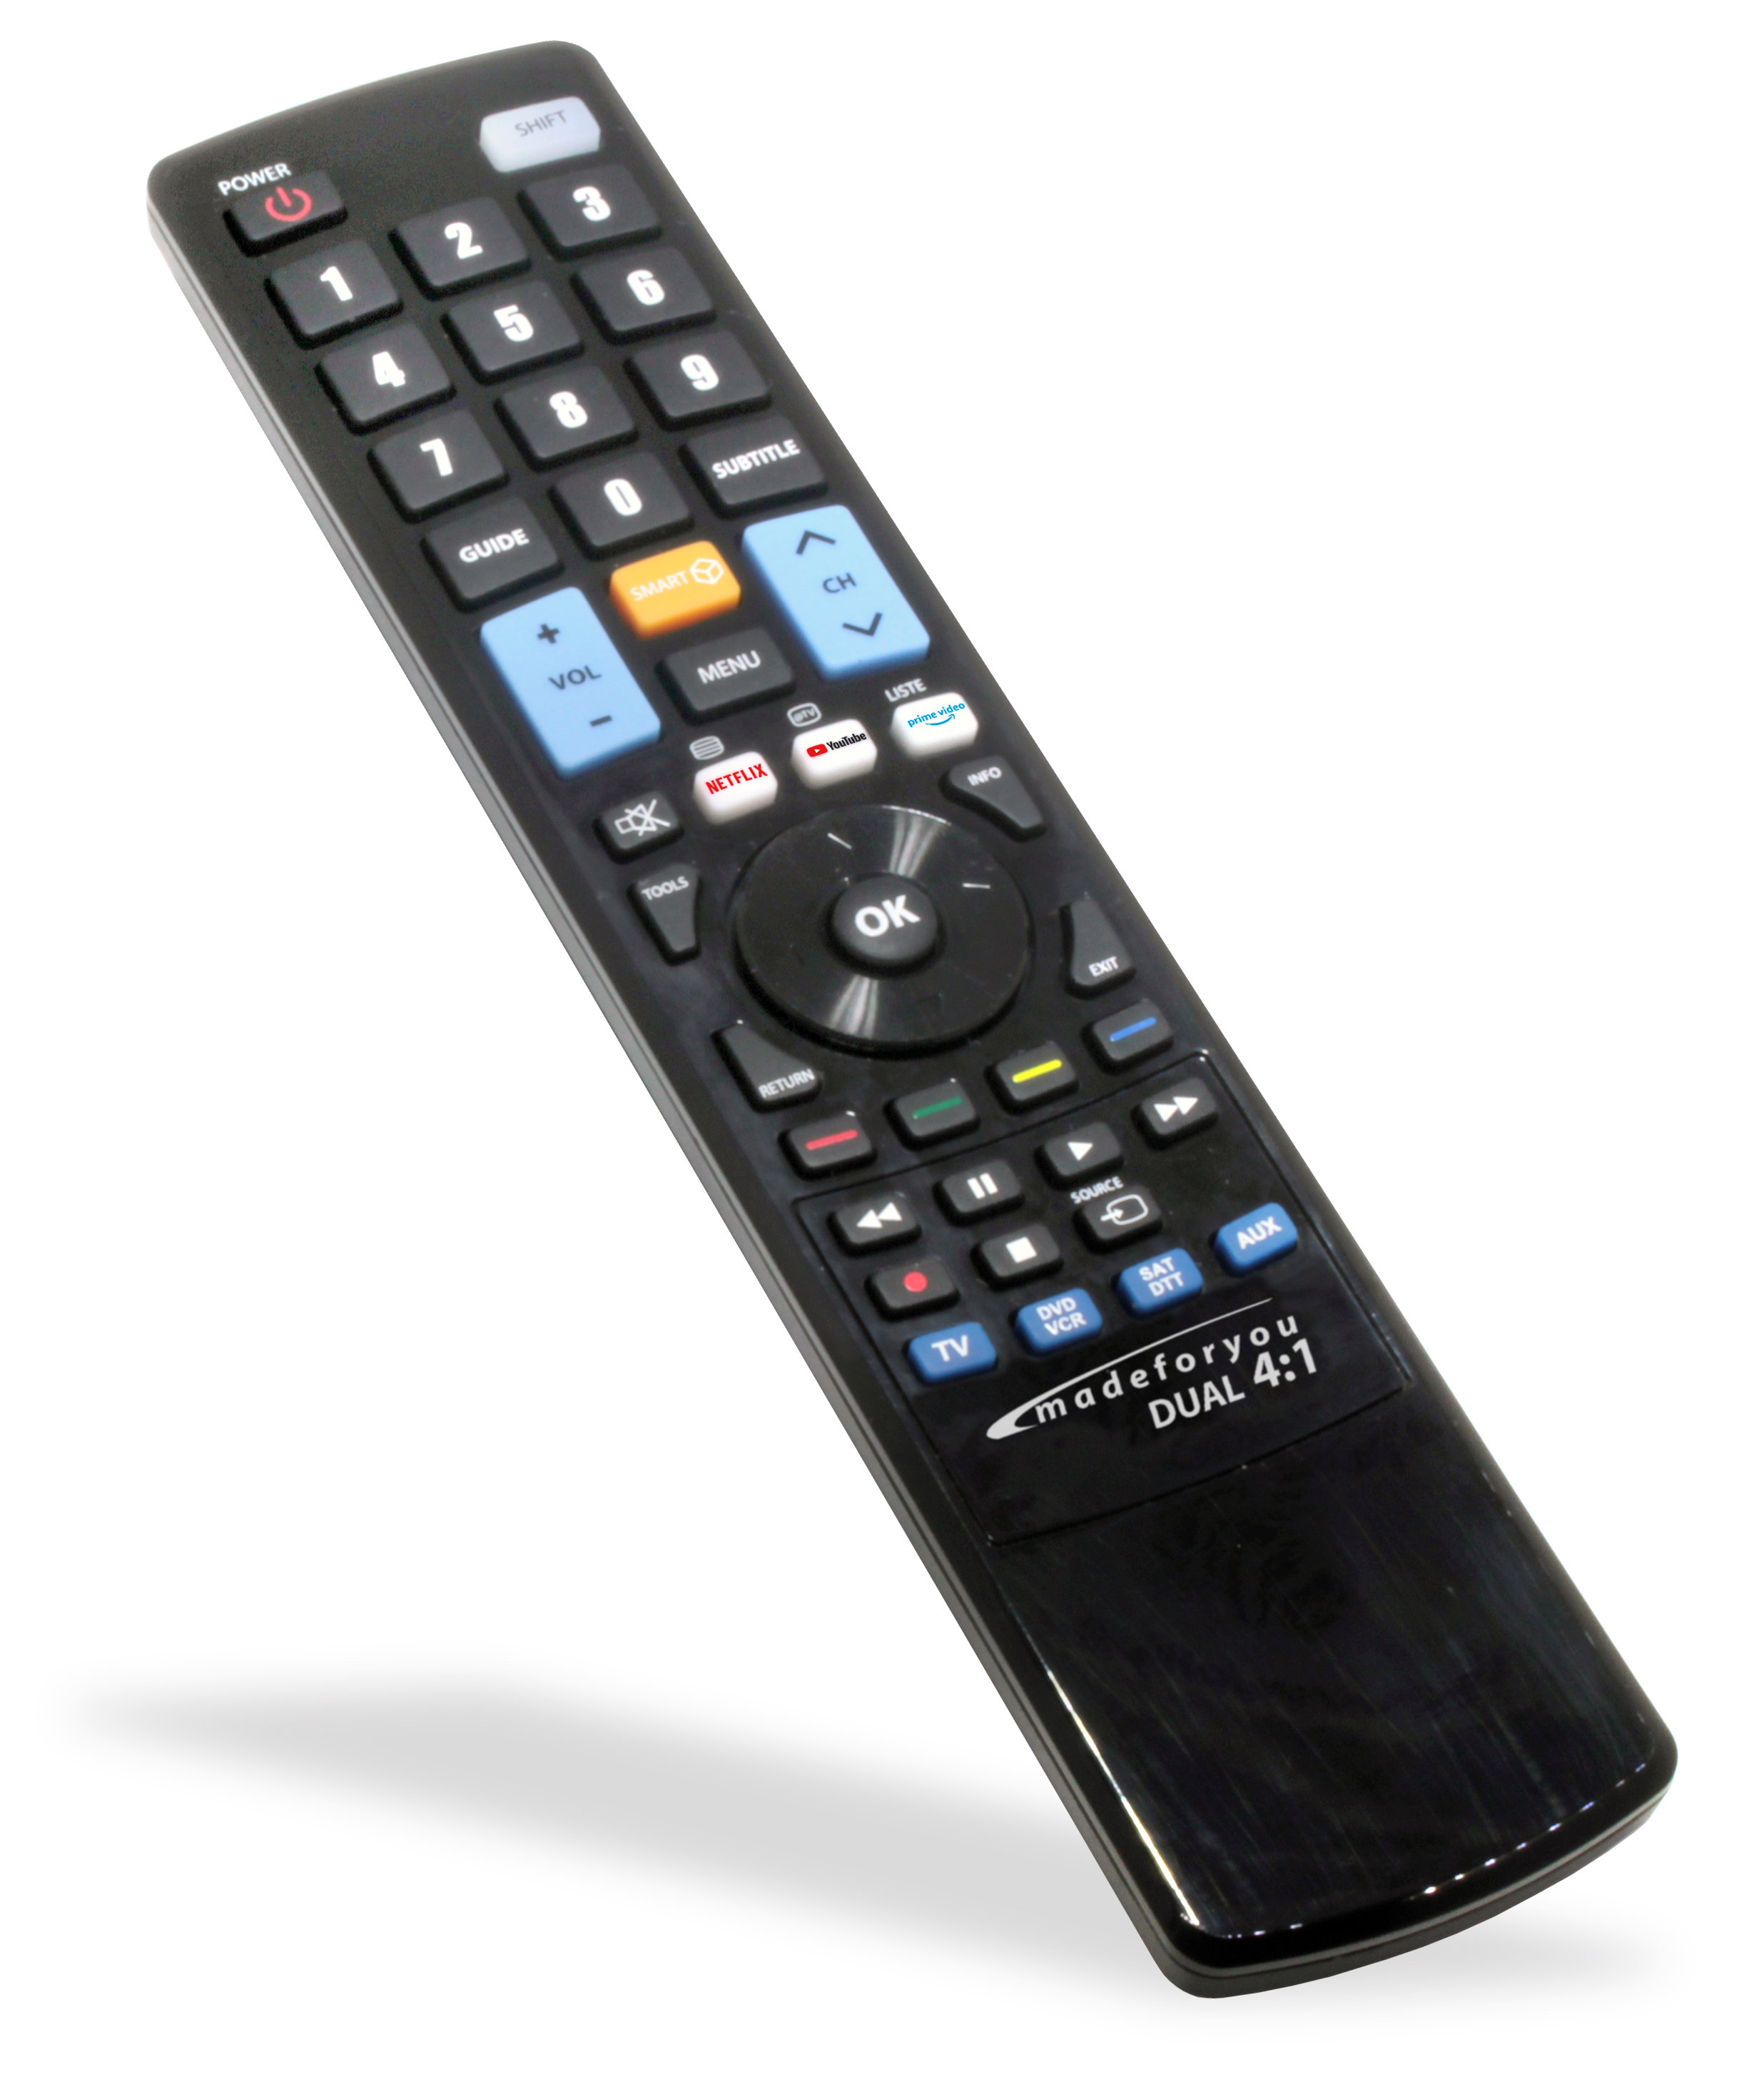 JL1771 Made for you 4:1 Elegant Programmable Universal Remote Control